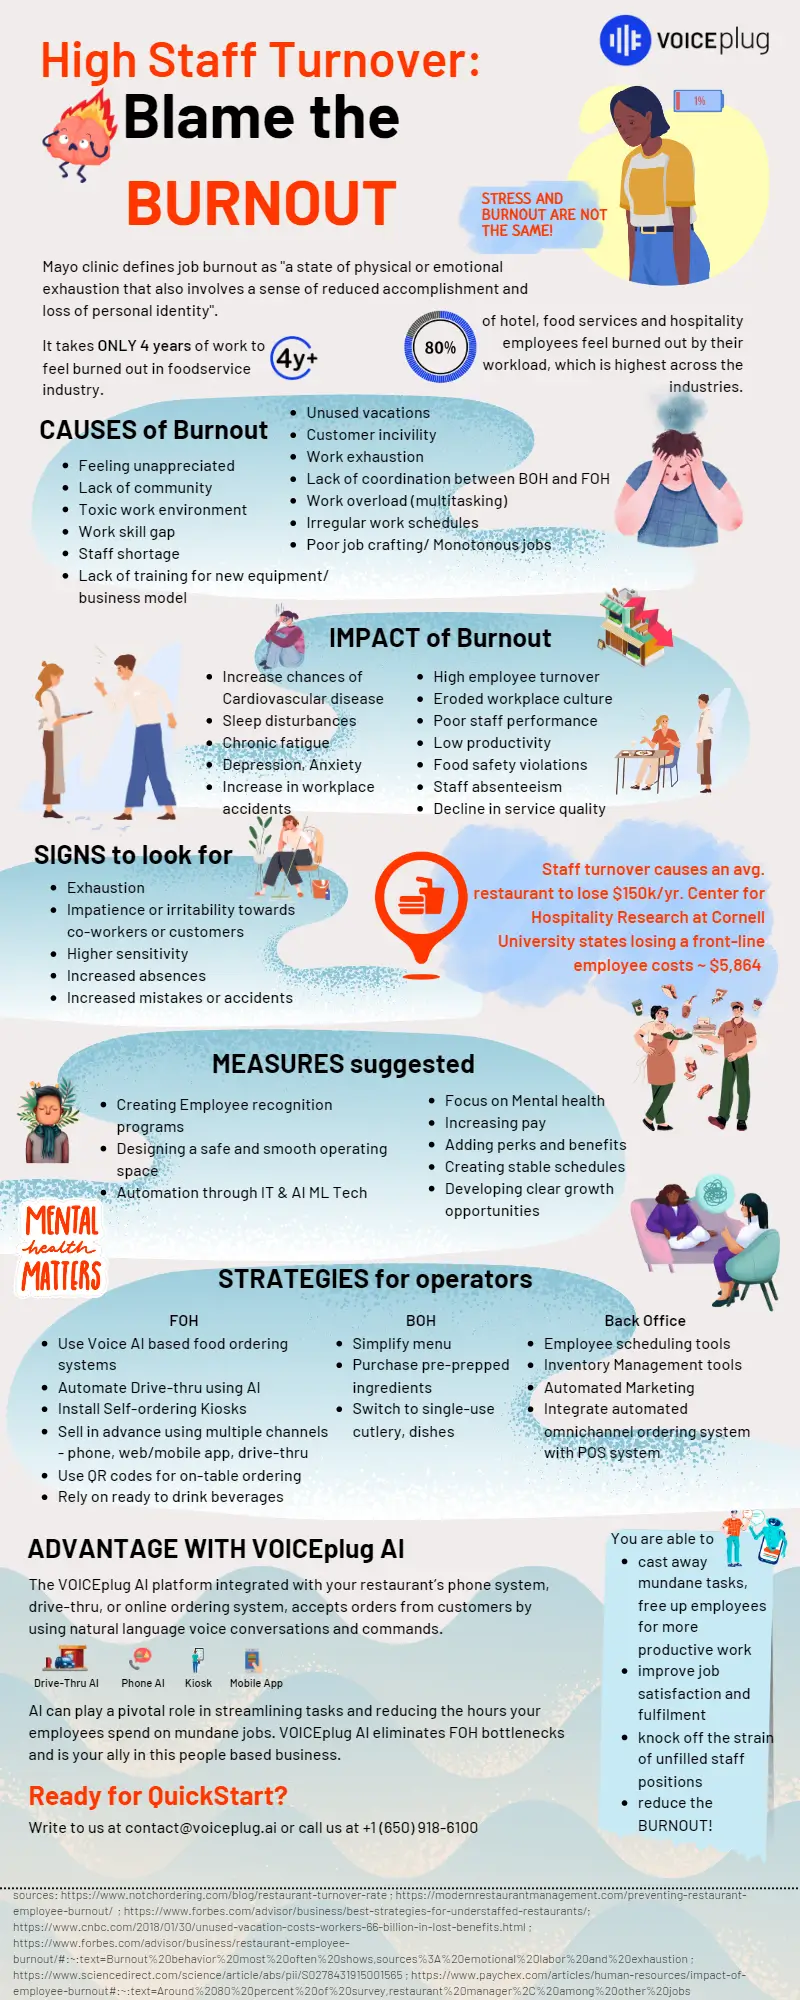 Infographic detailing all the cons and costs related to burnout happening in restaurant industry